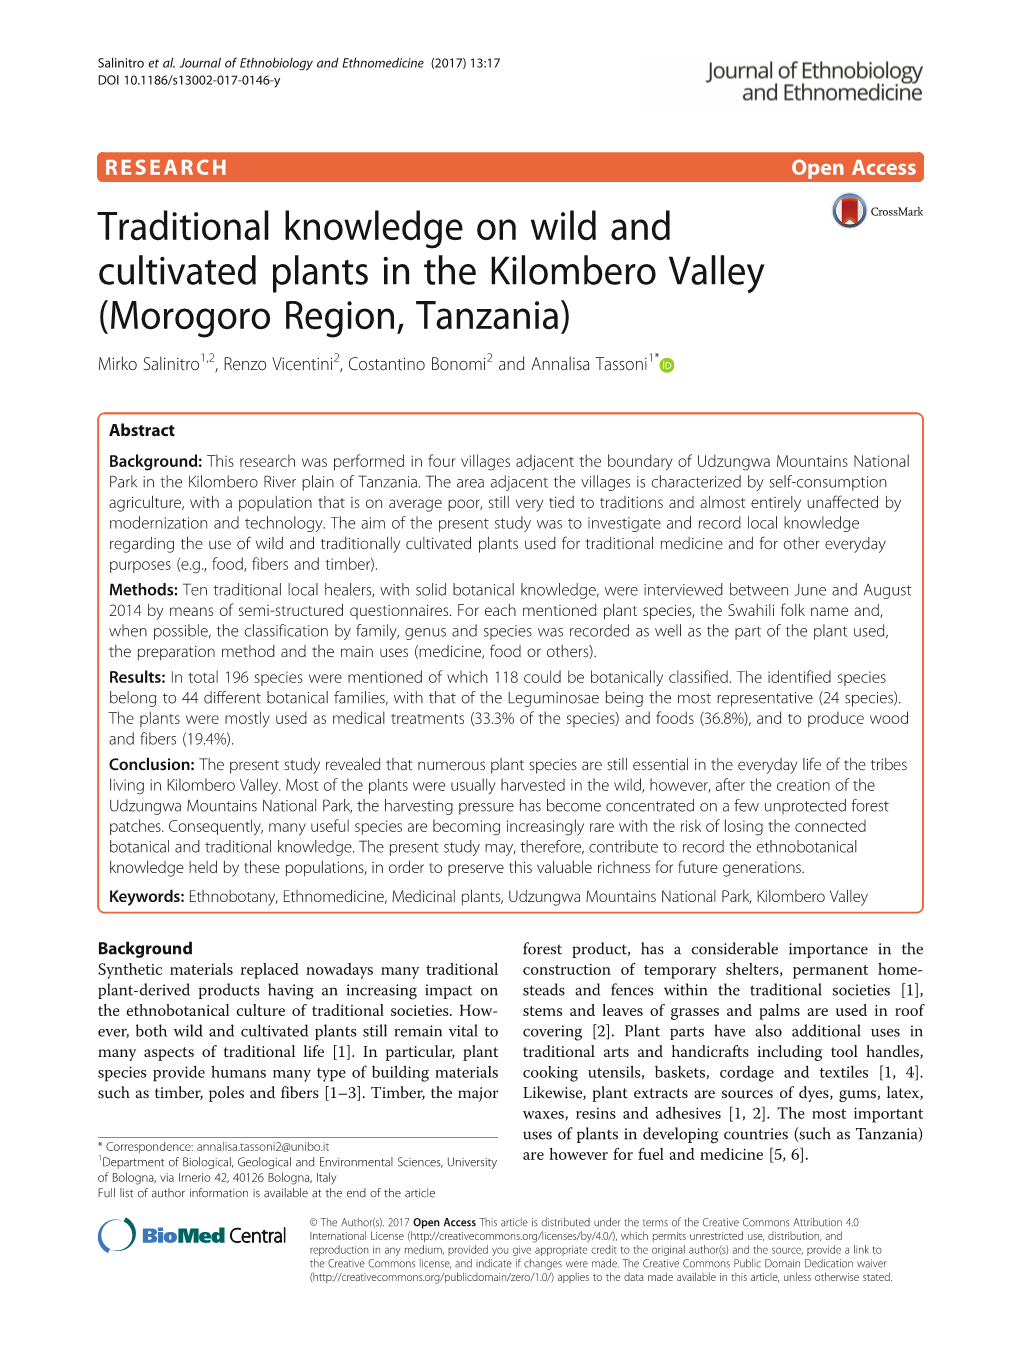 Traditional Knowledge on Wild and Cultivated Plants in the Kilombero